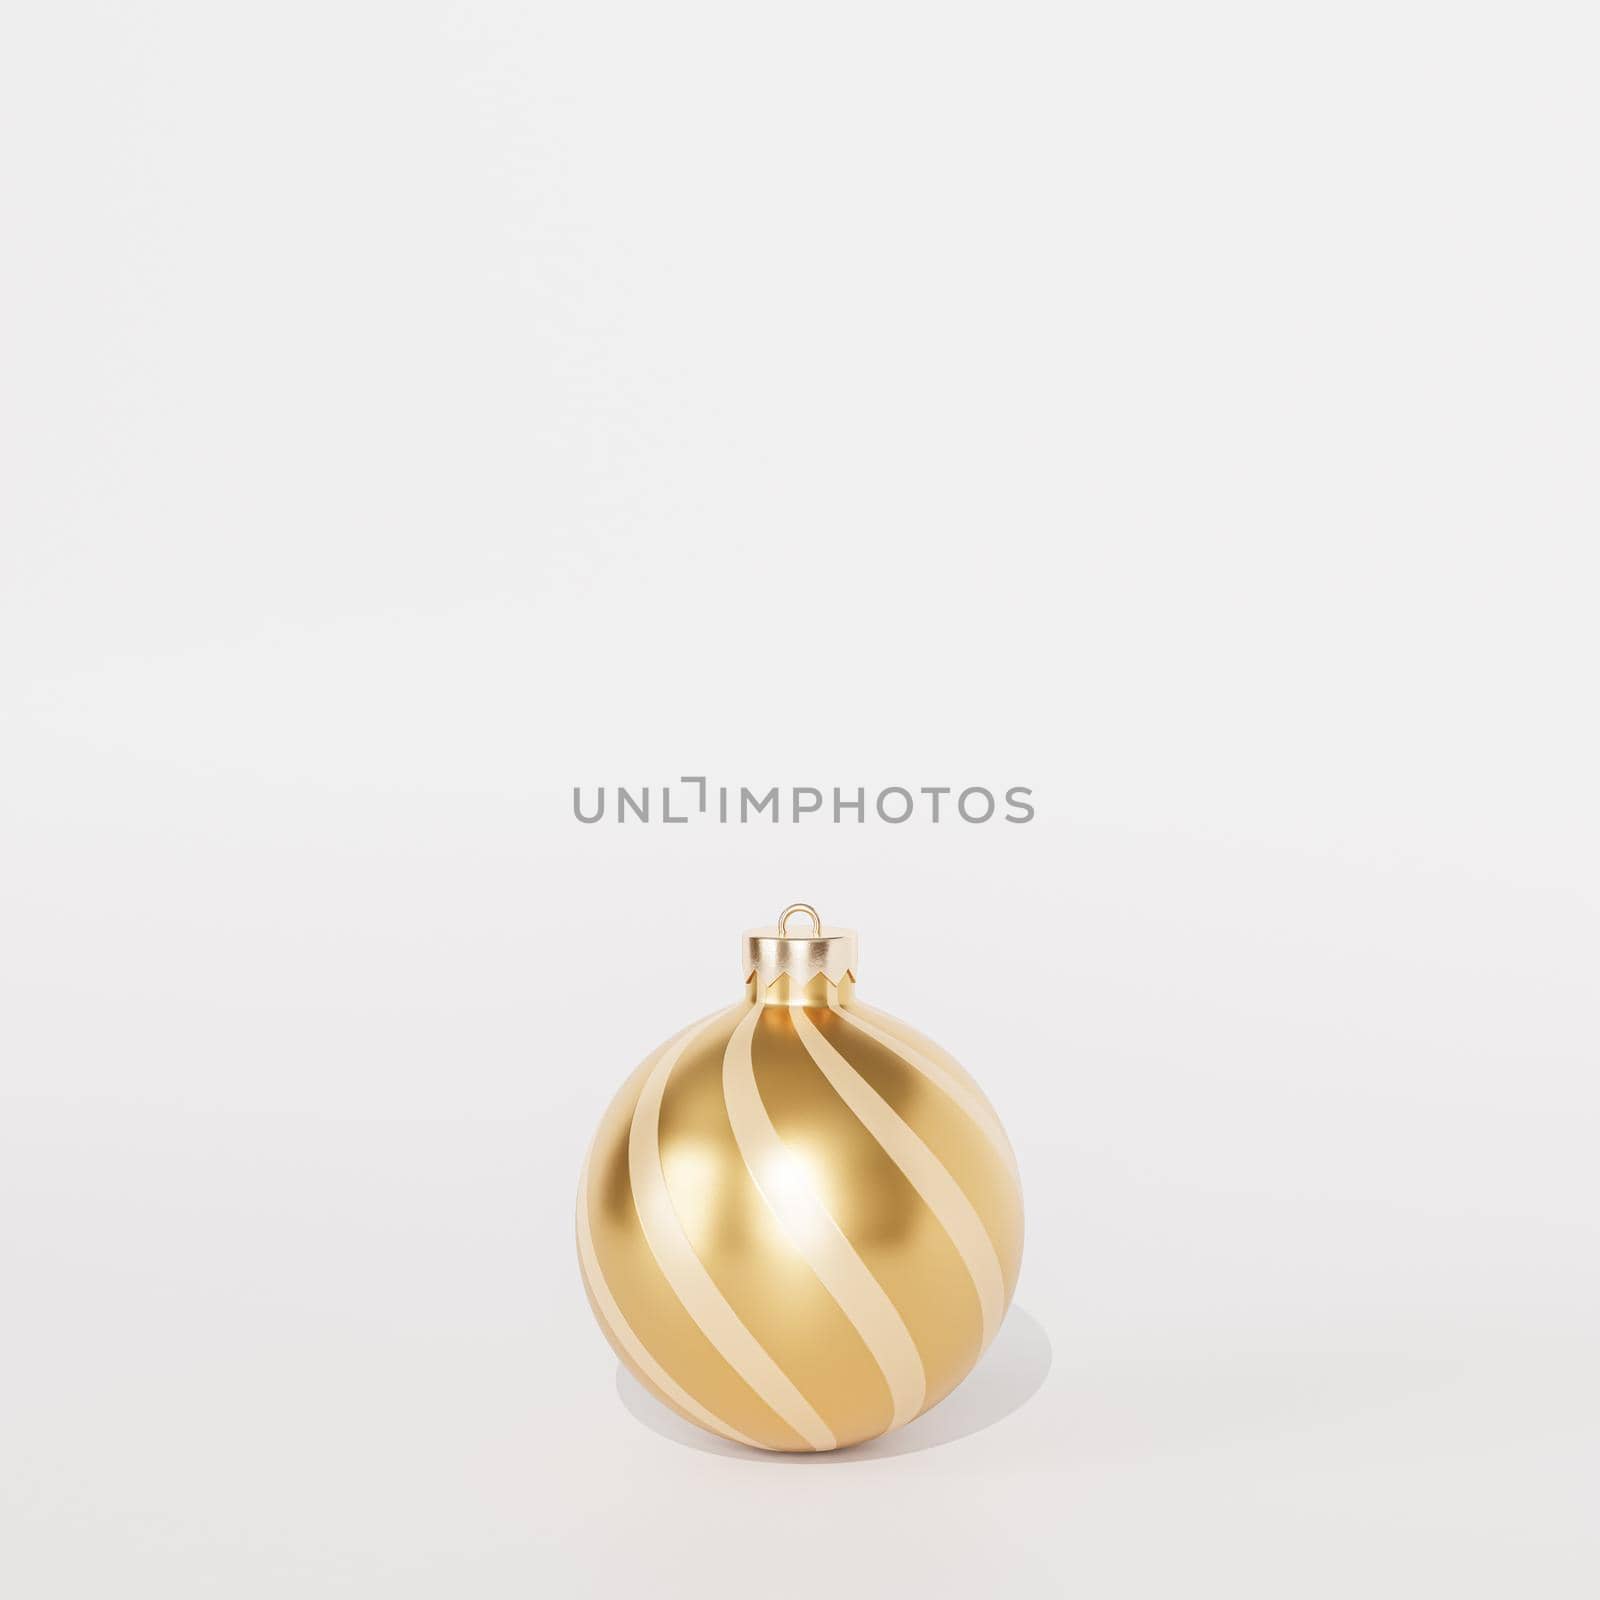 Christmas or New Year holidays background with one golden bauble or ornament, 3d render by Frostroomhead